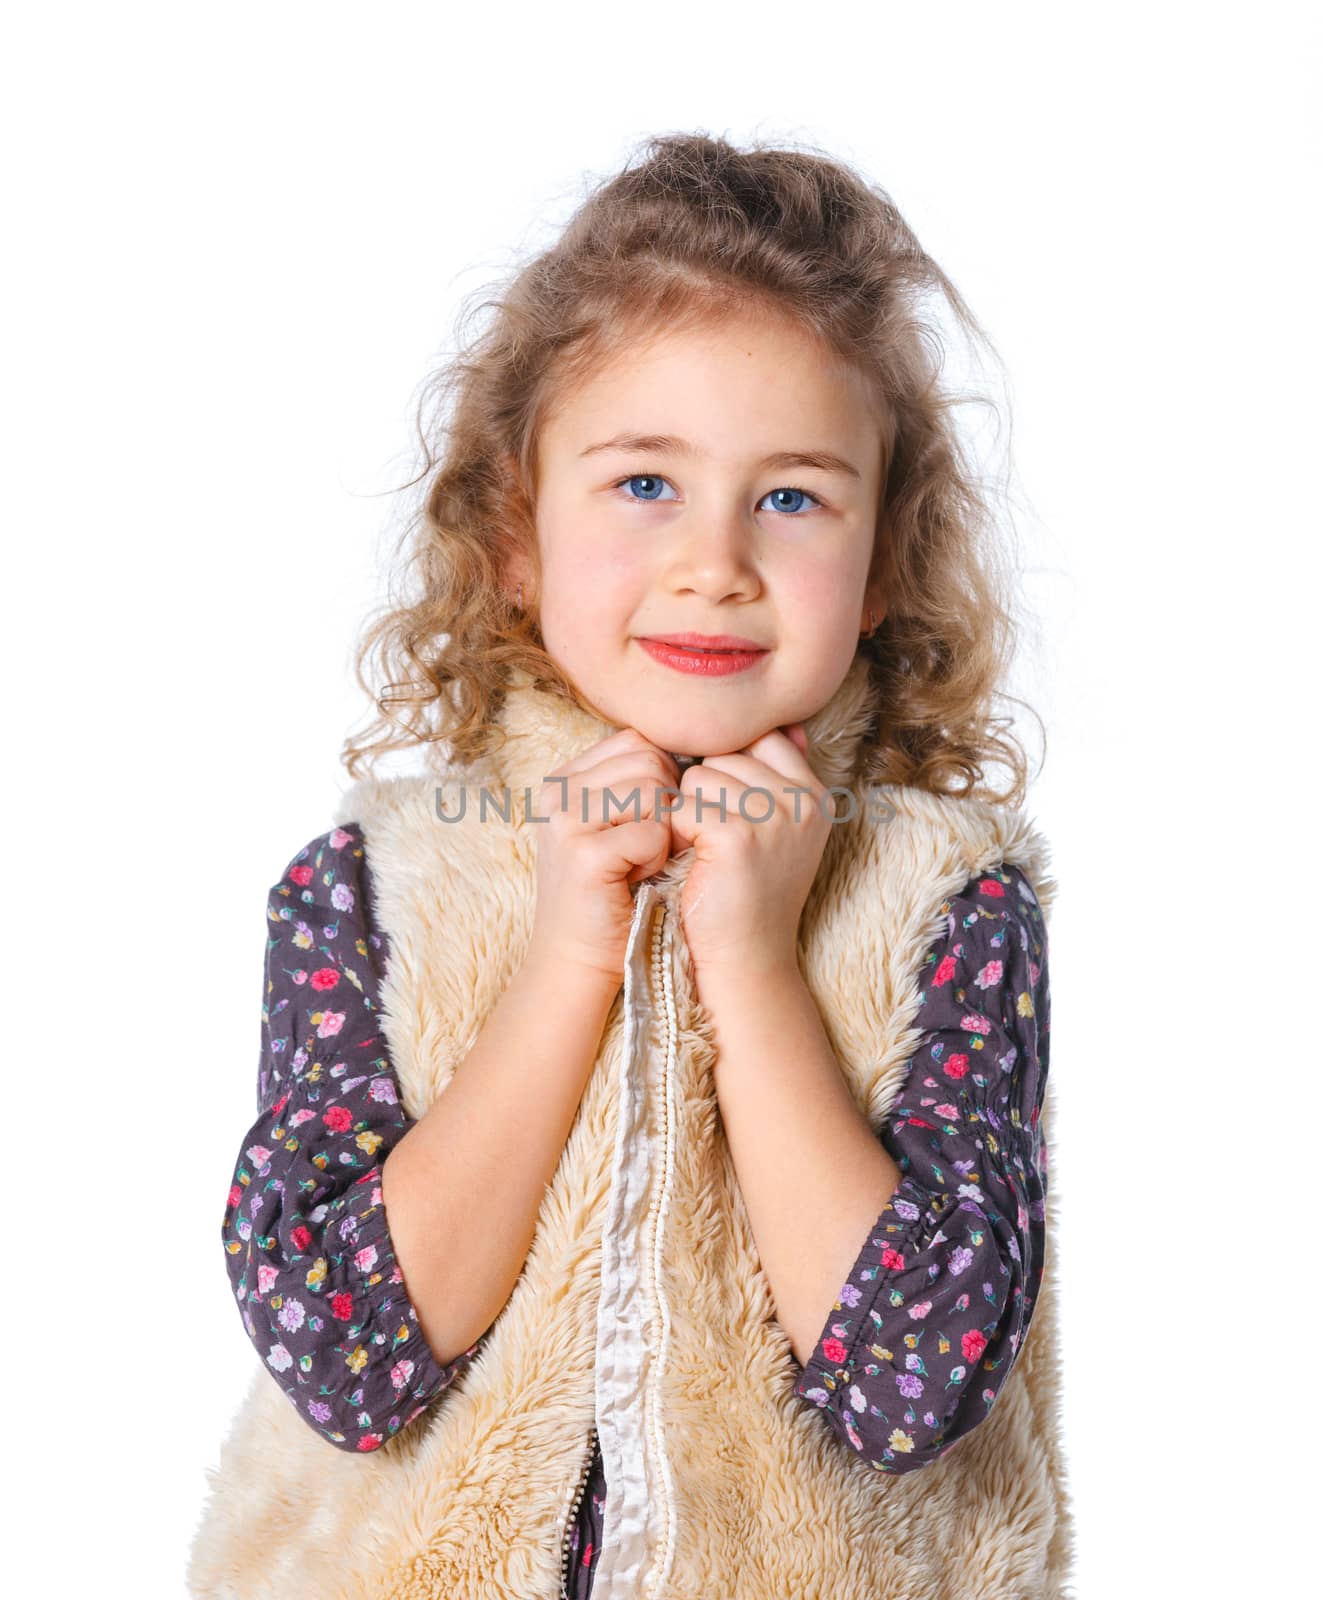 A beautiful young girl dressed for winter, over a white background